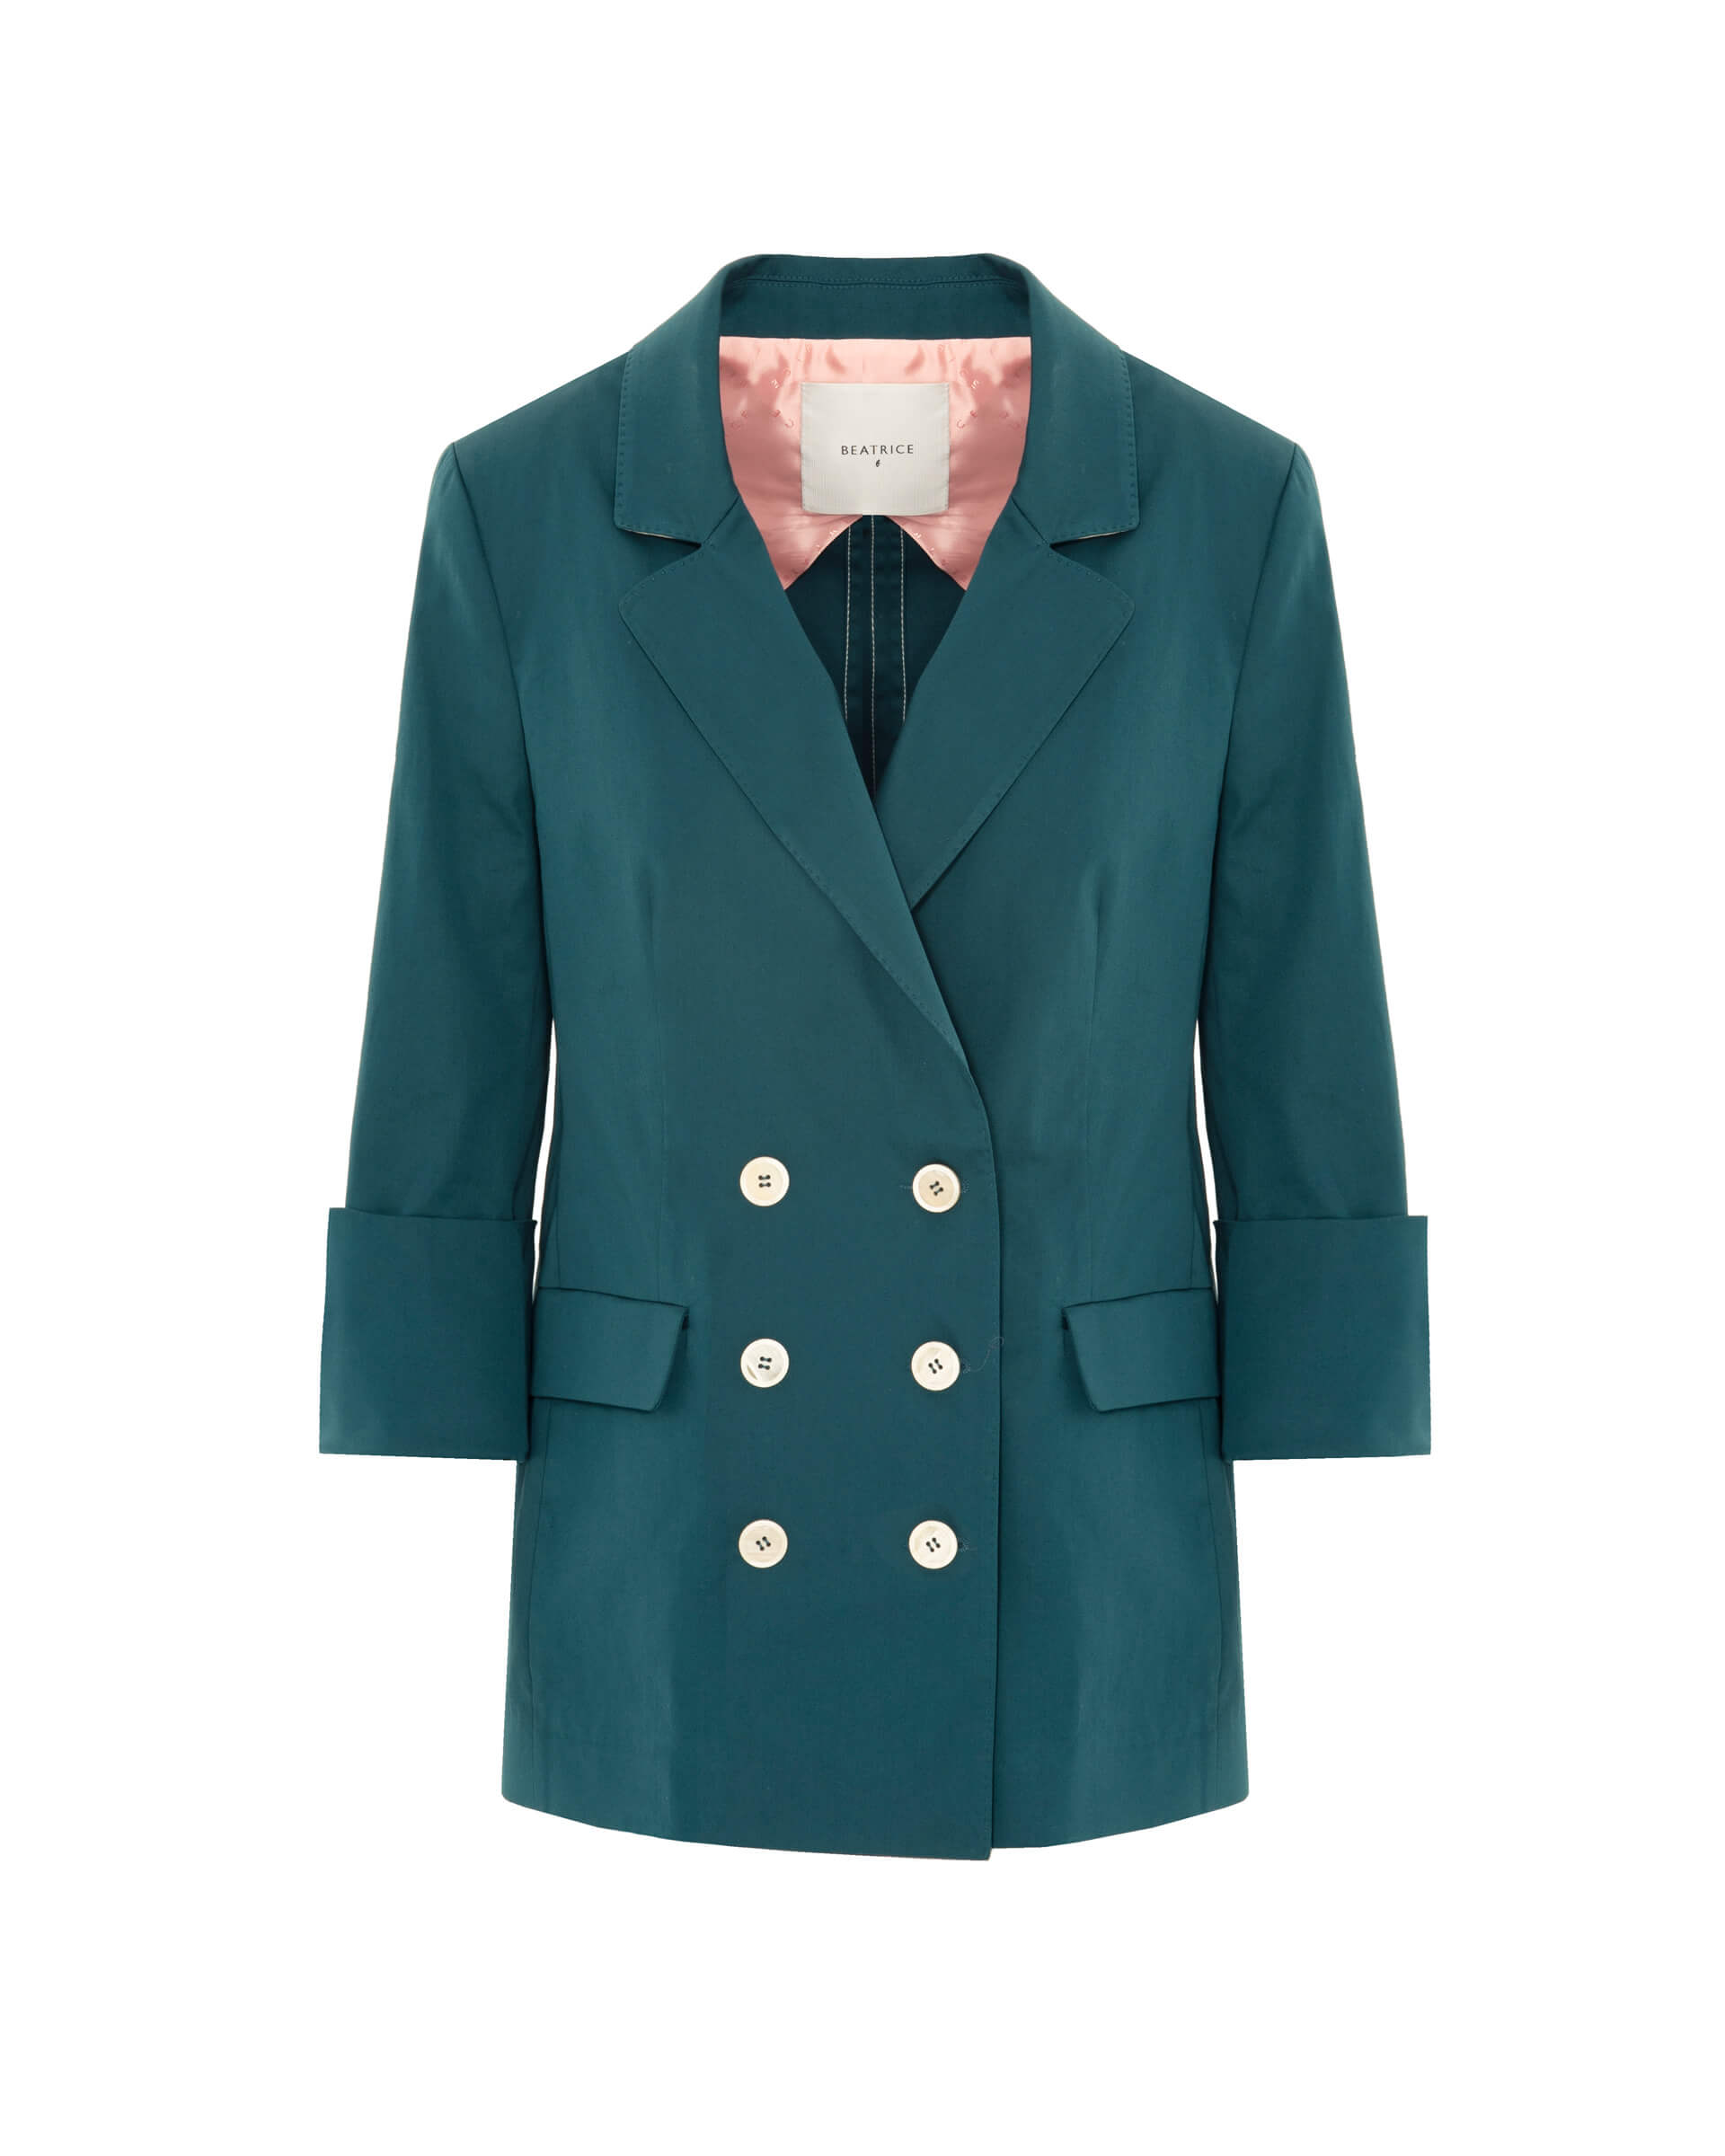 Elegant outerwear, timeless trench coats and casual jackets